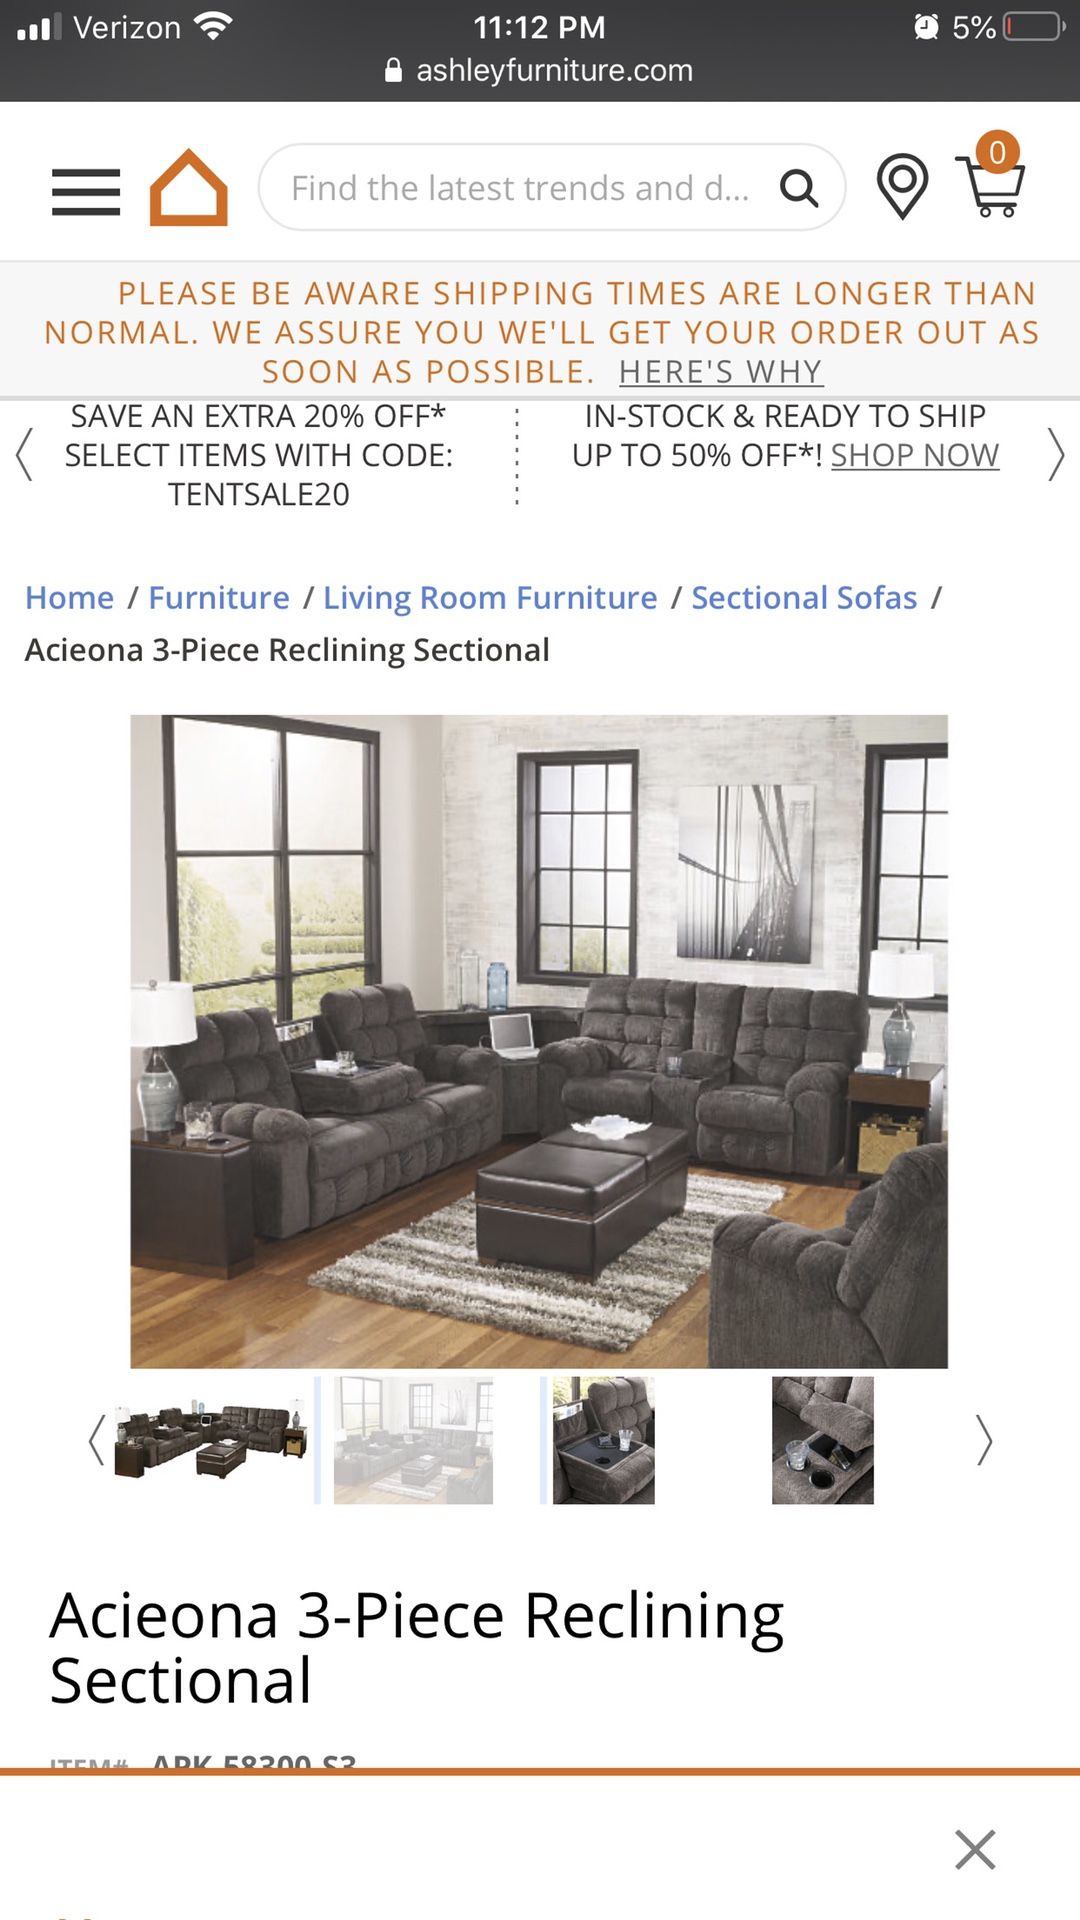 3-piece reclining sectional from Ashley’s Furniture